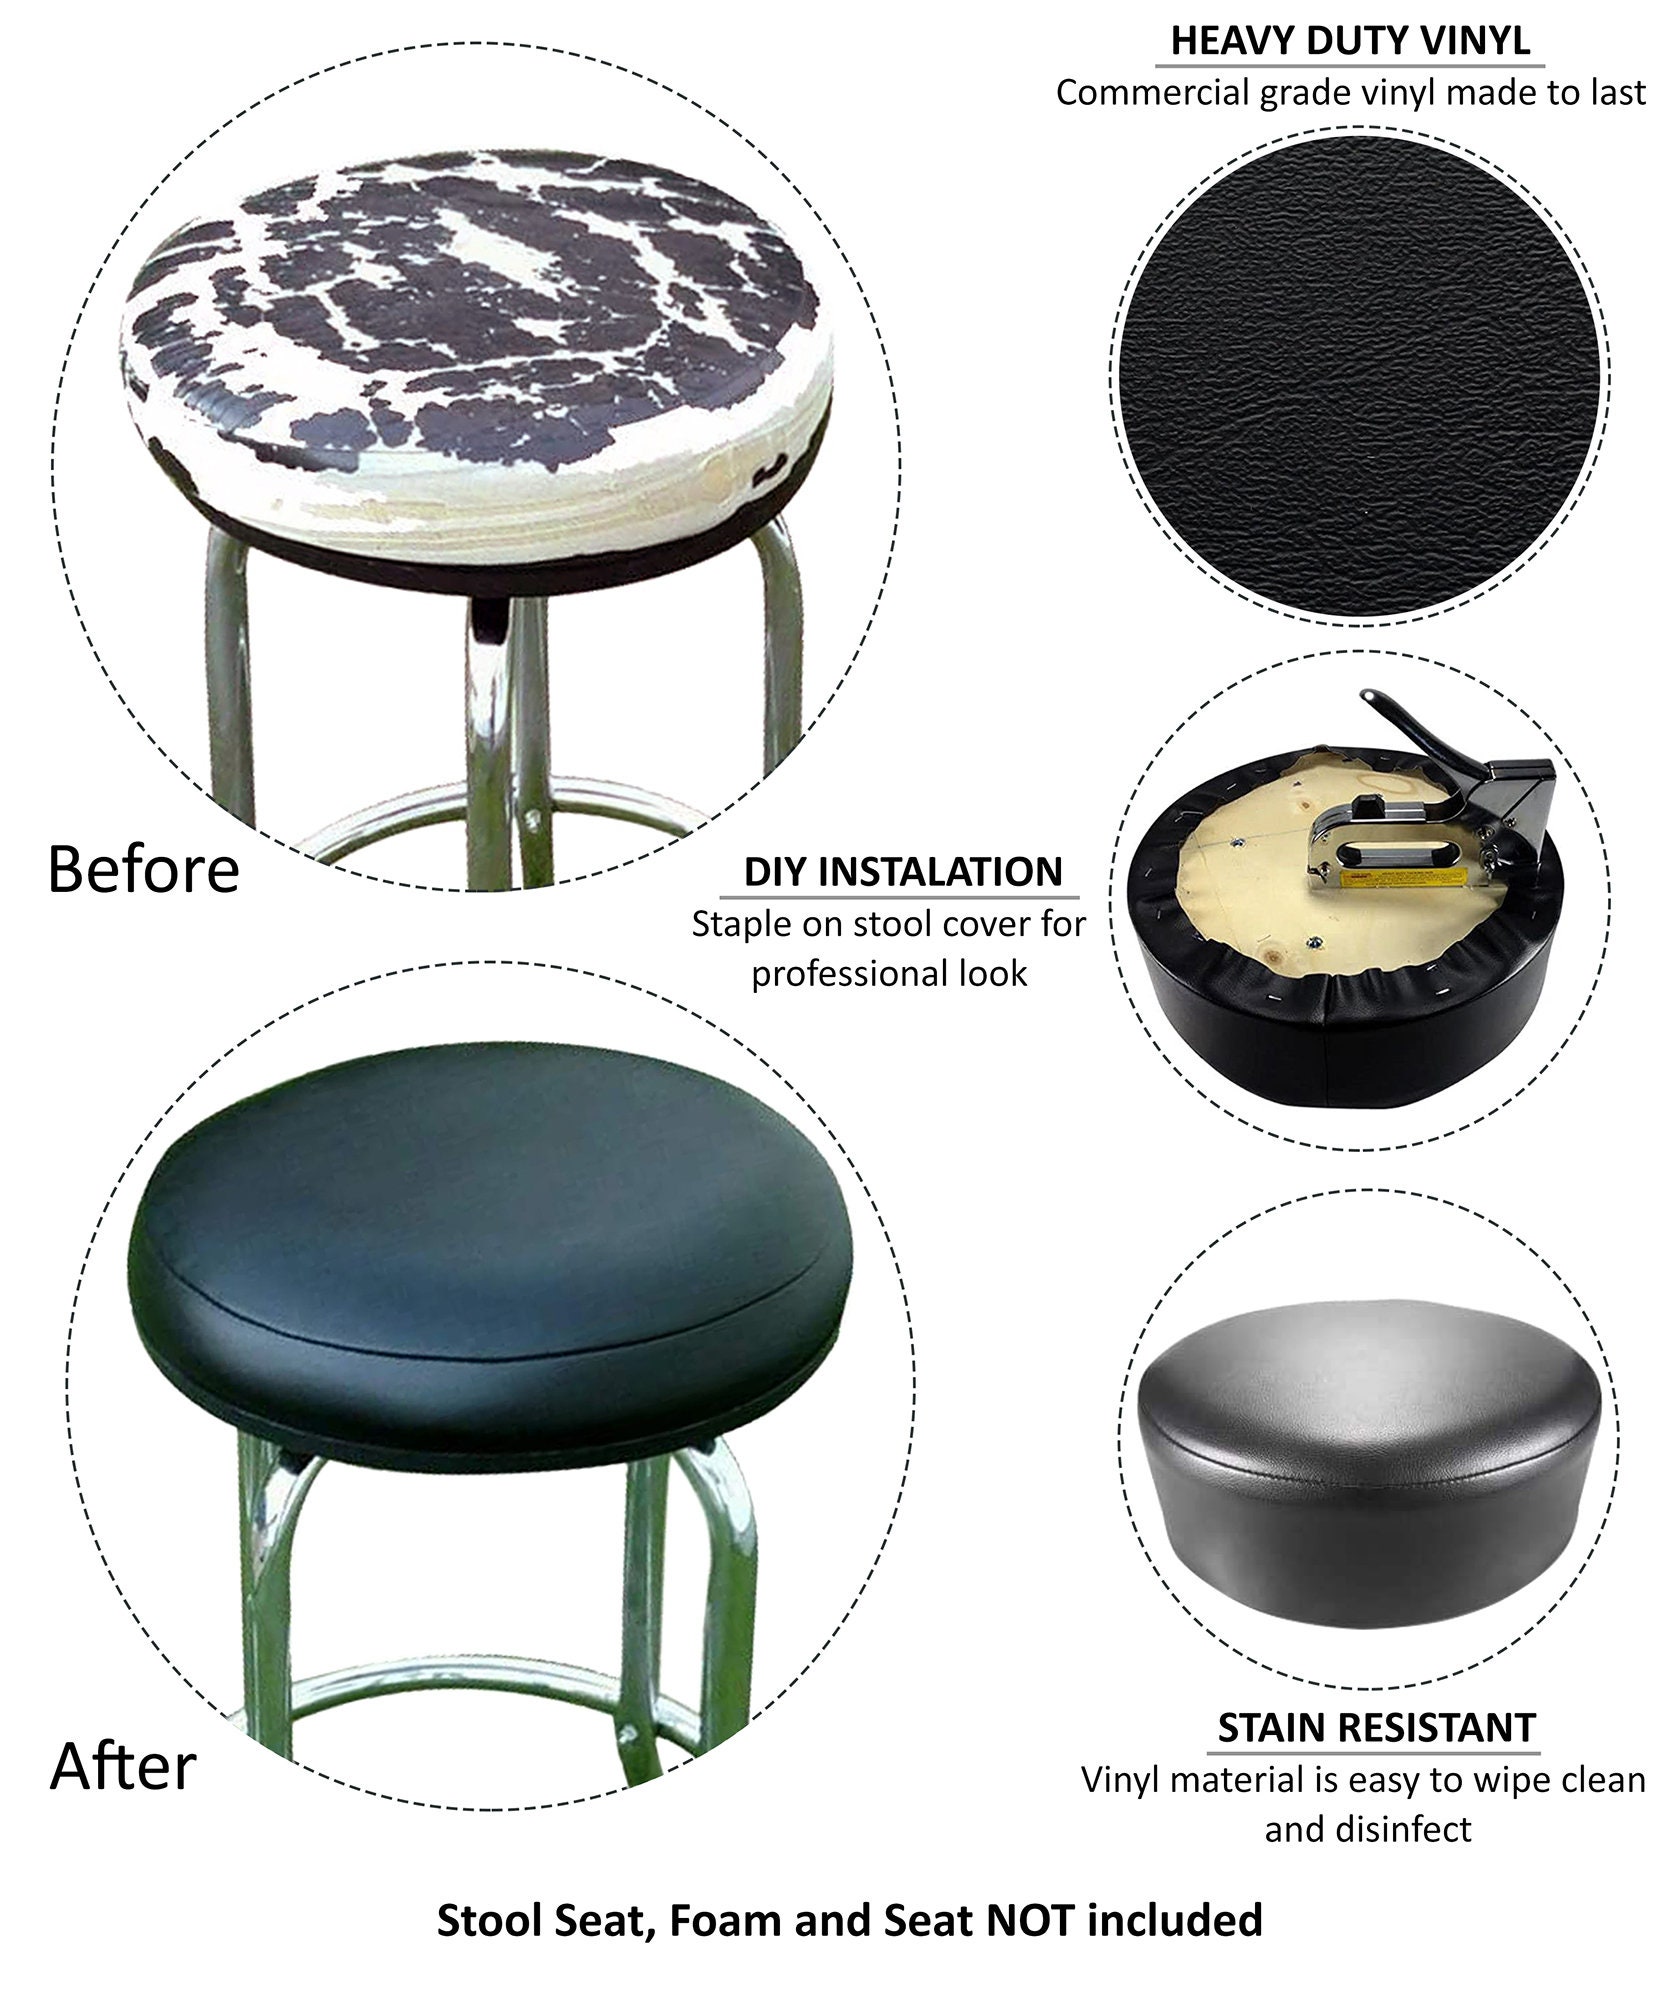 Bar Stool Cover Replacement Staple On Seat Top Made with Heavy Duty Commercial Grade Vinyl 15 inch Diameter, Dark Gray 